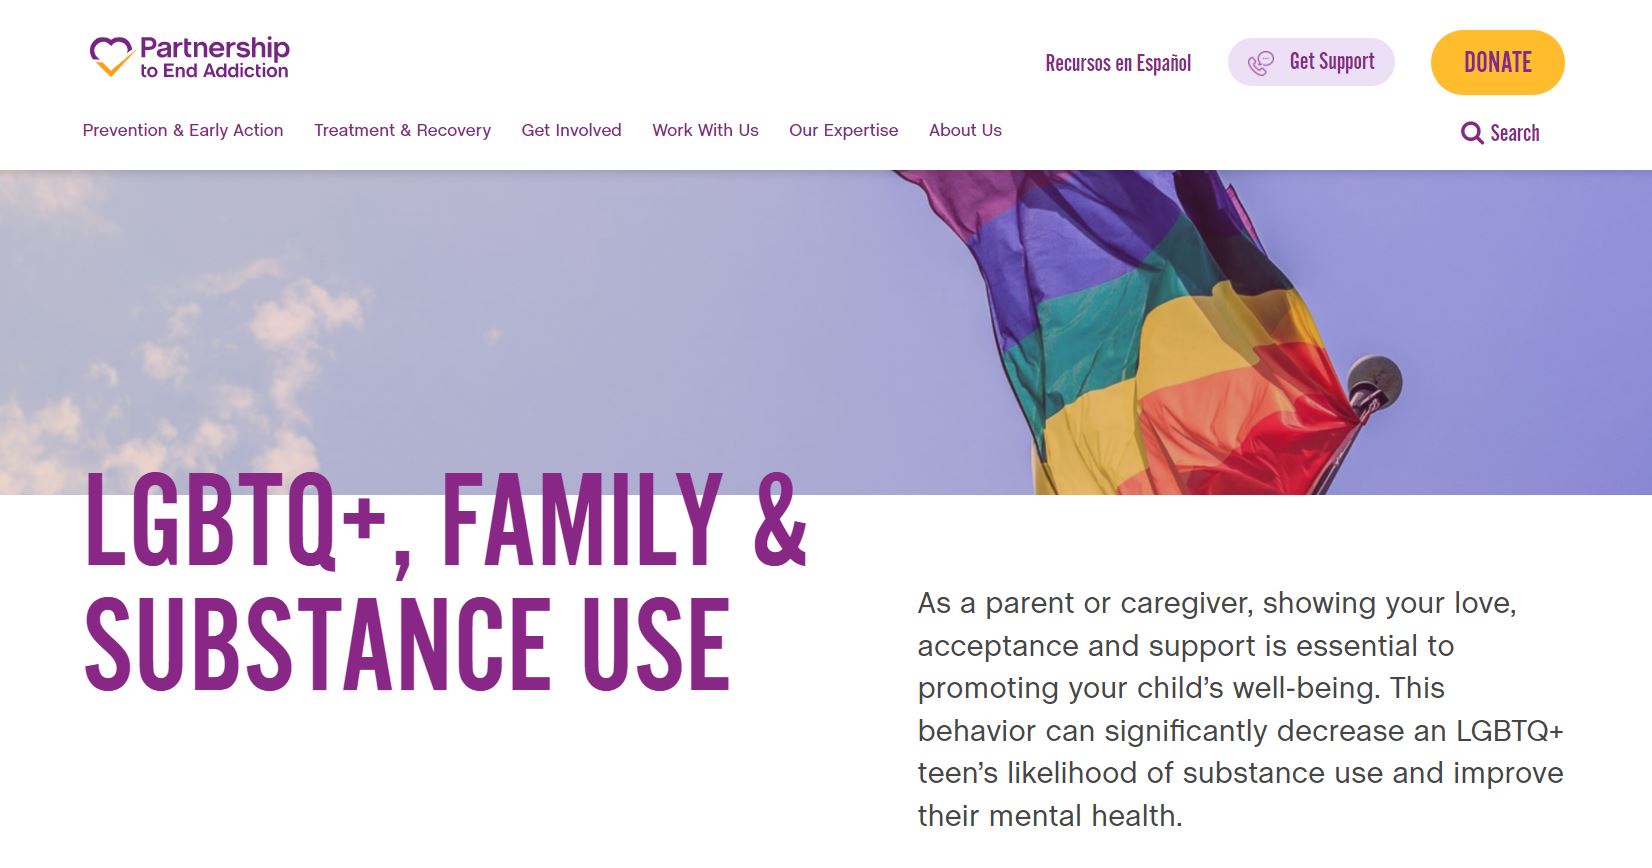 Partnership to End Addiction: Affirming our LGBTQ+ Youth